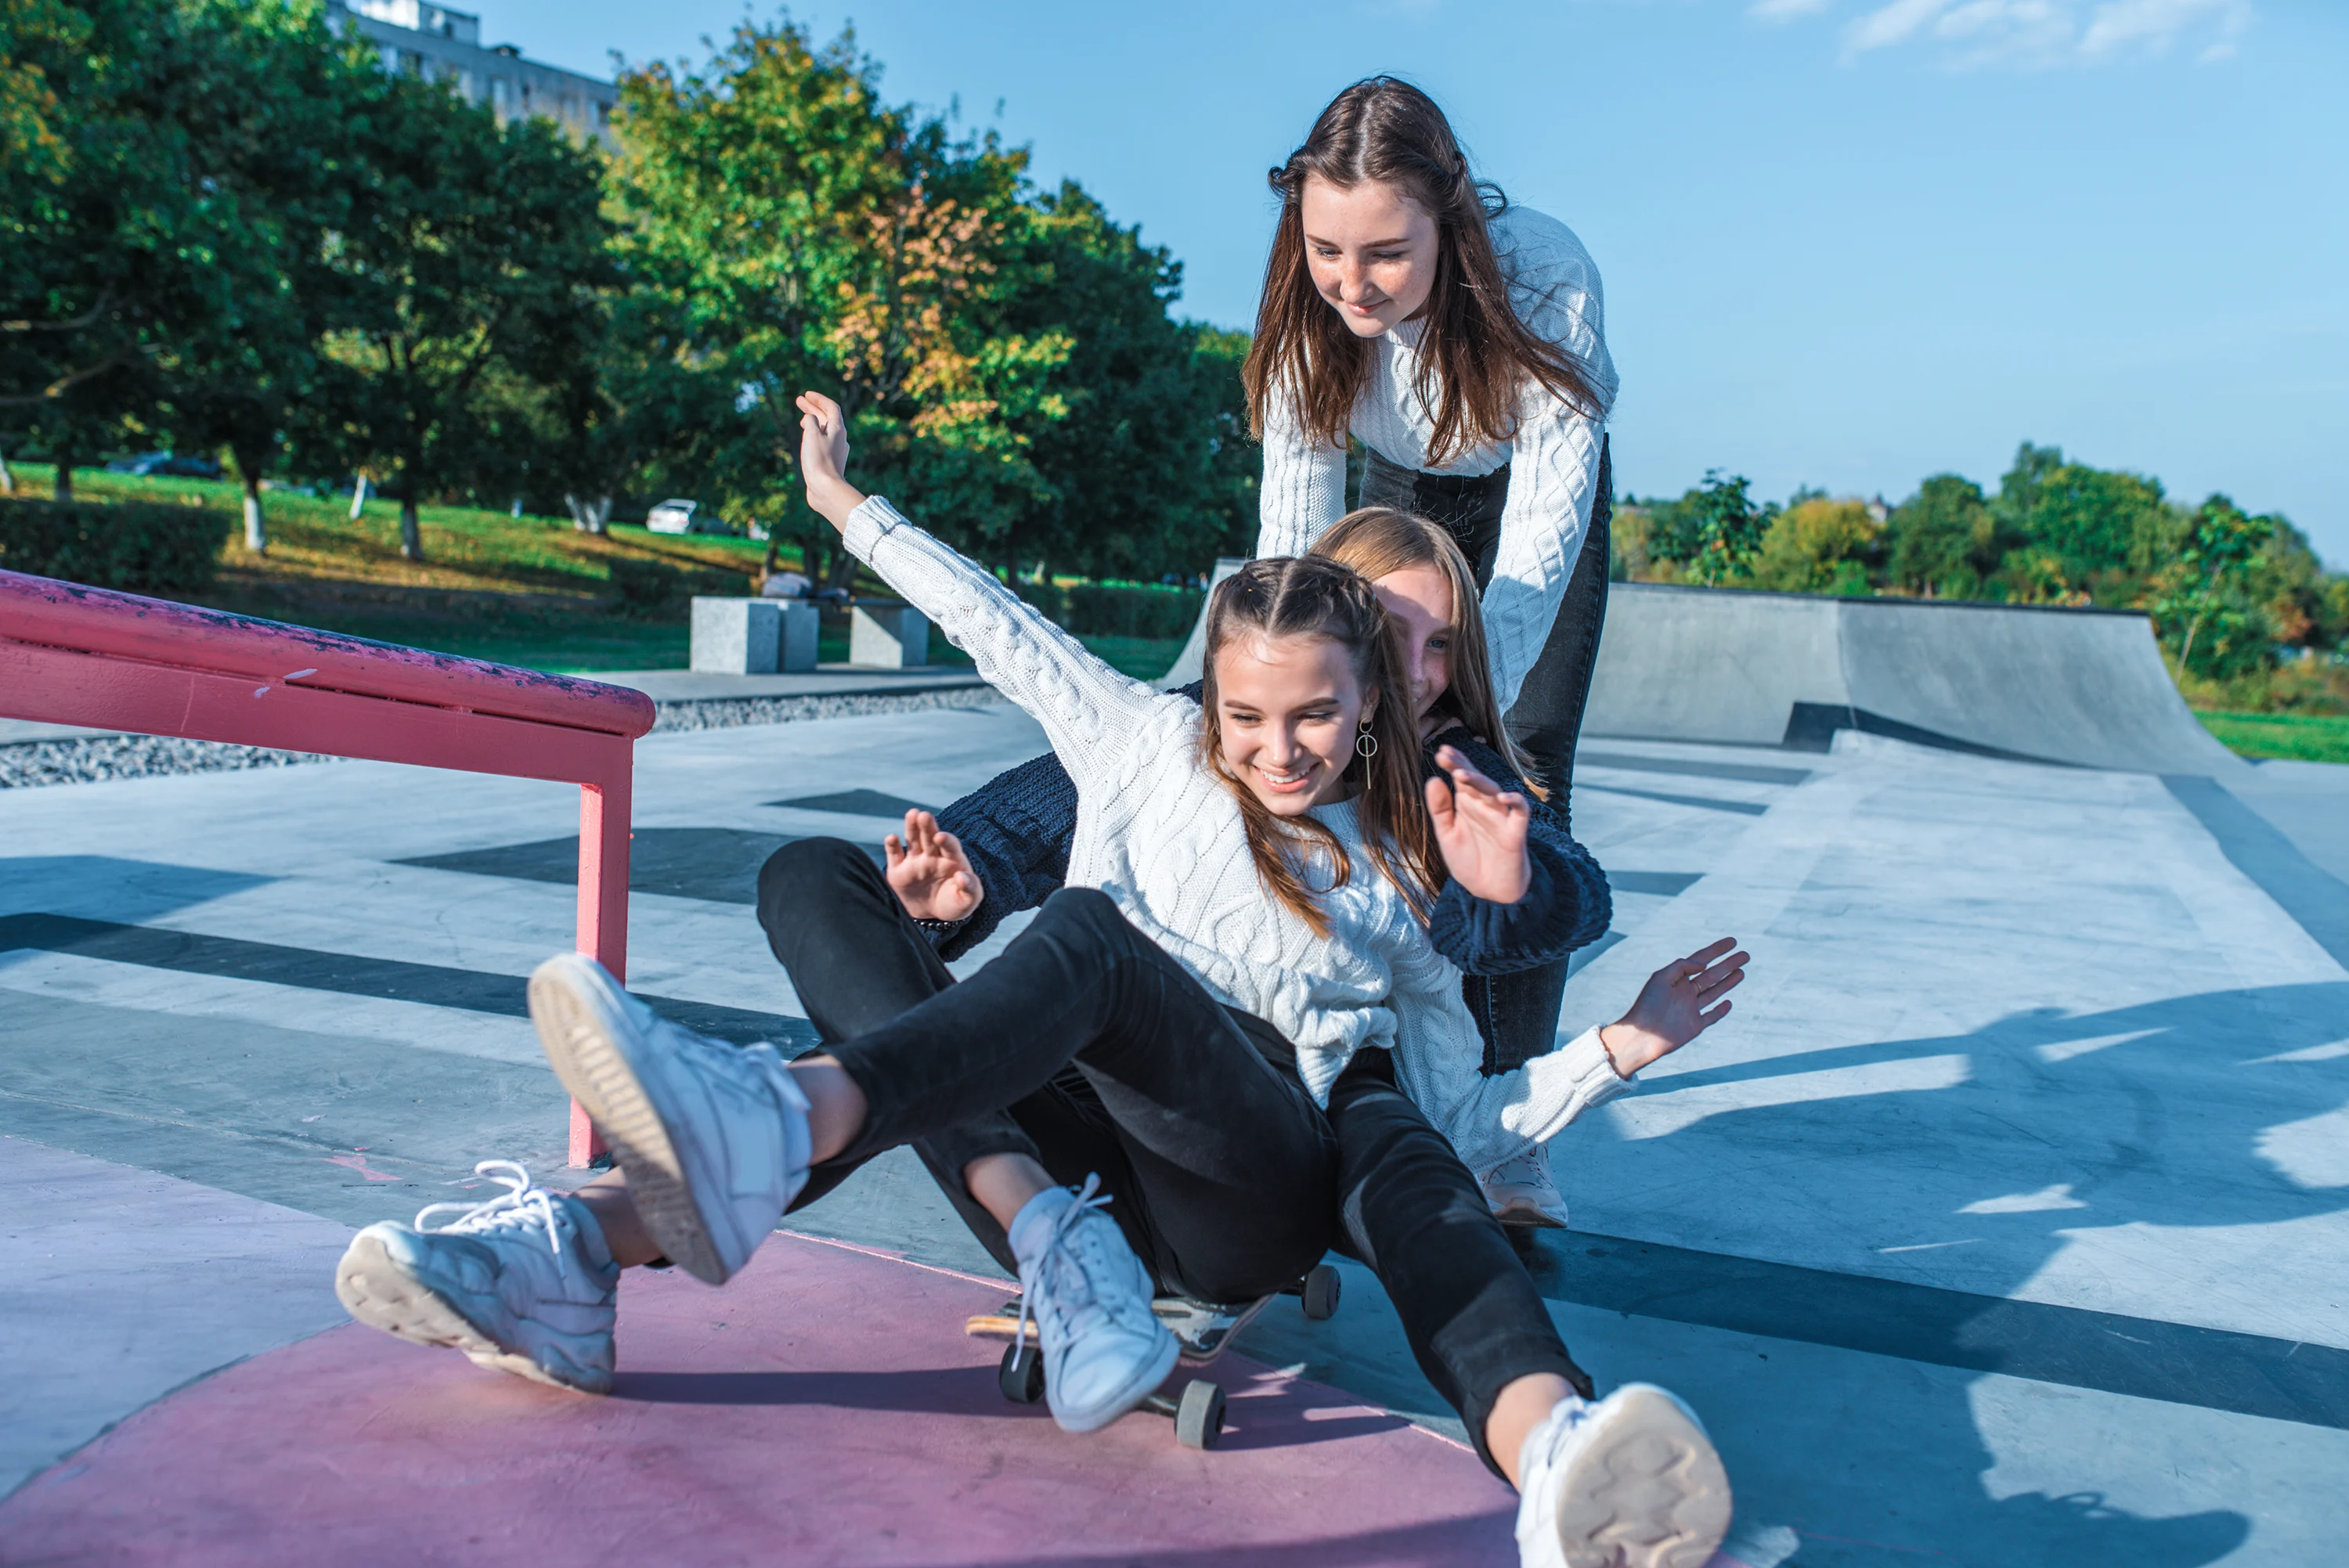 Girls playing and riding a skateboard